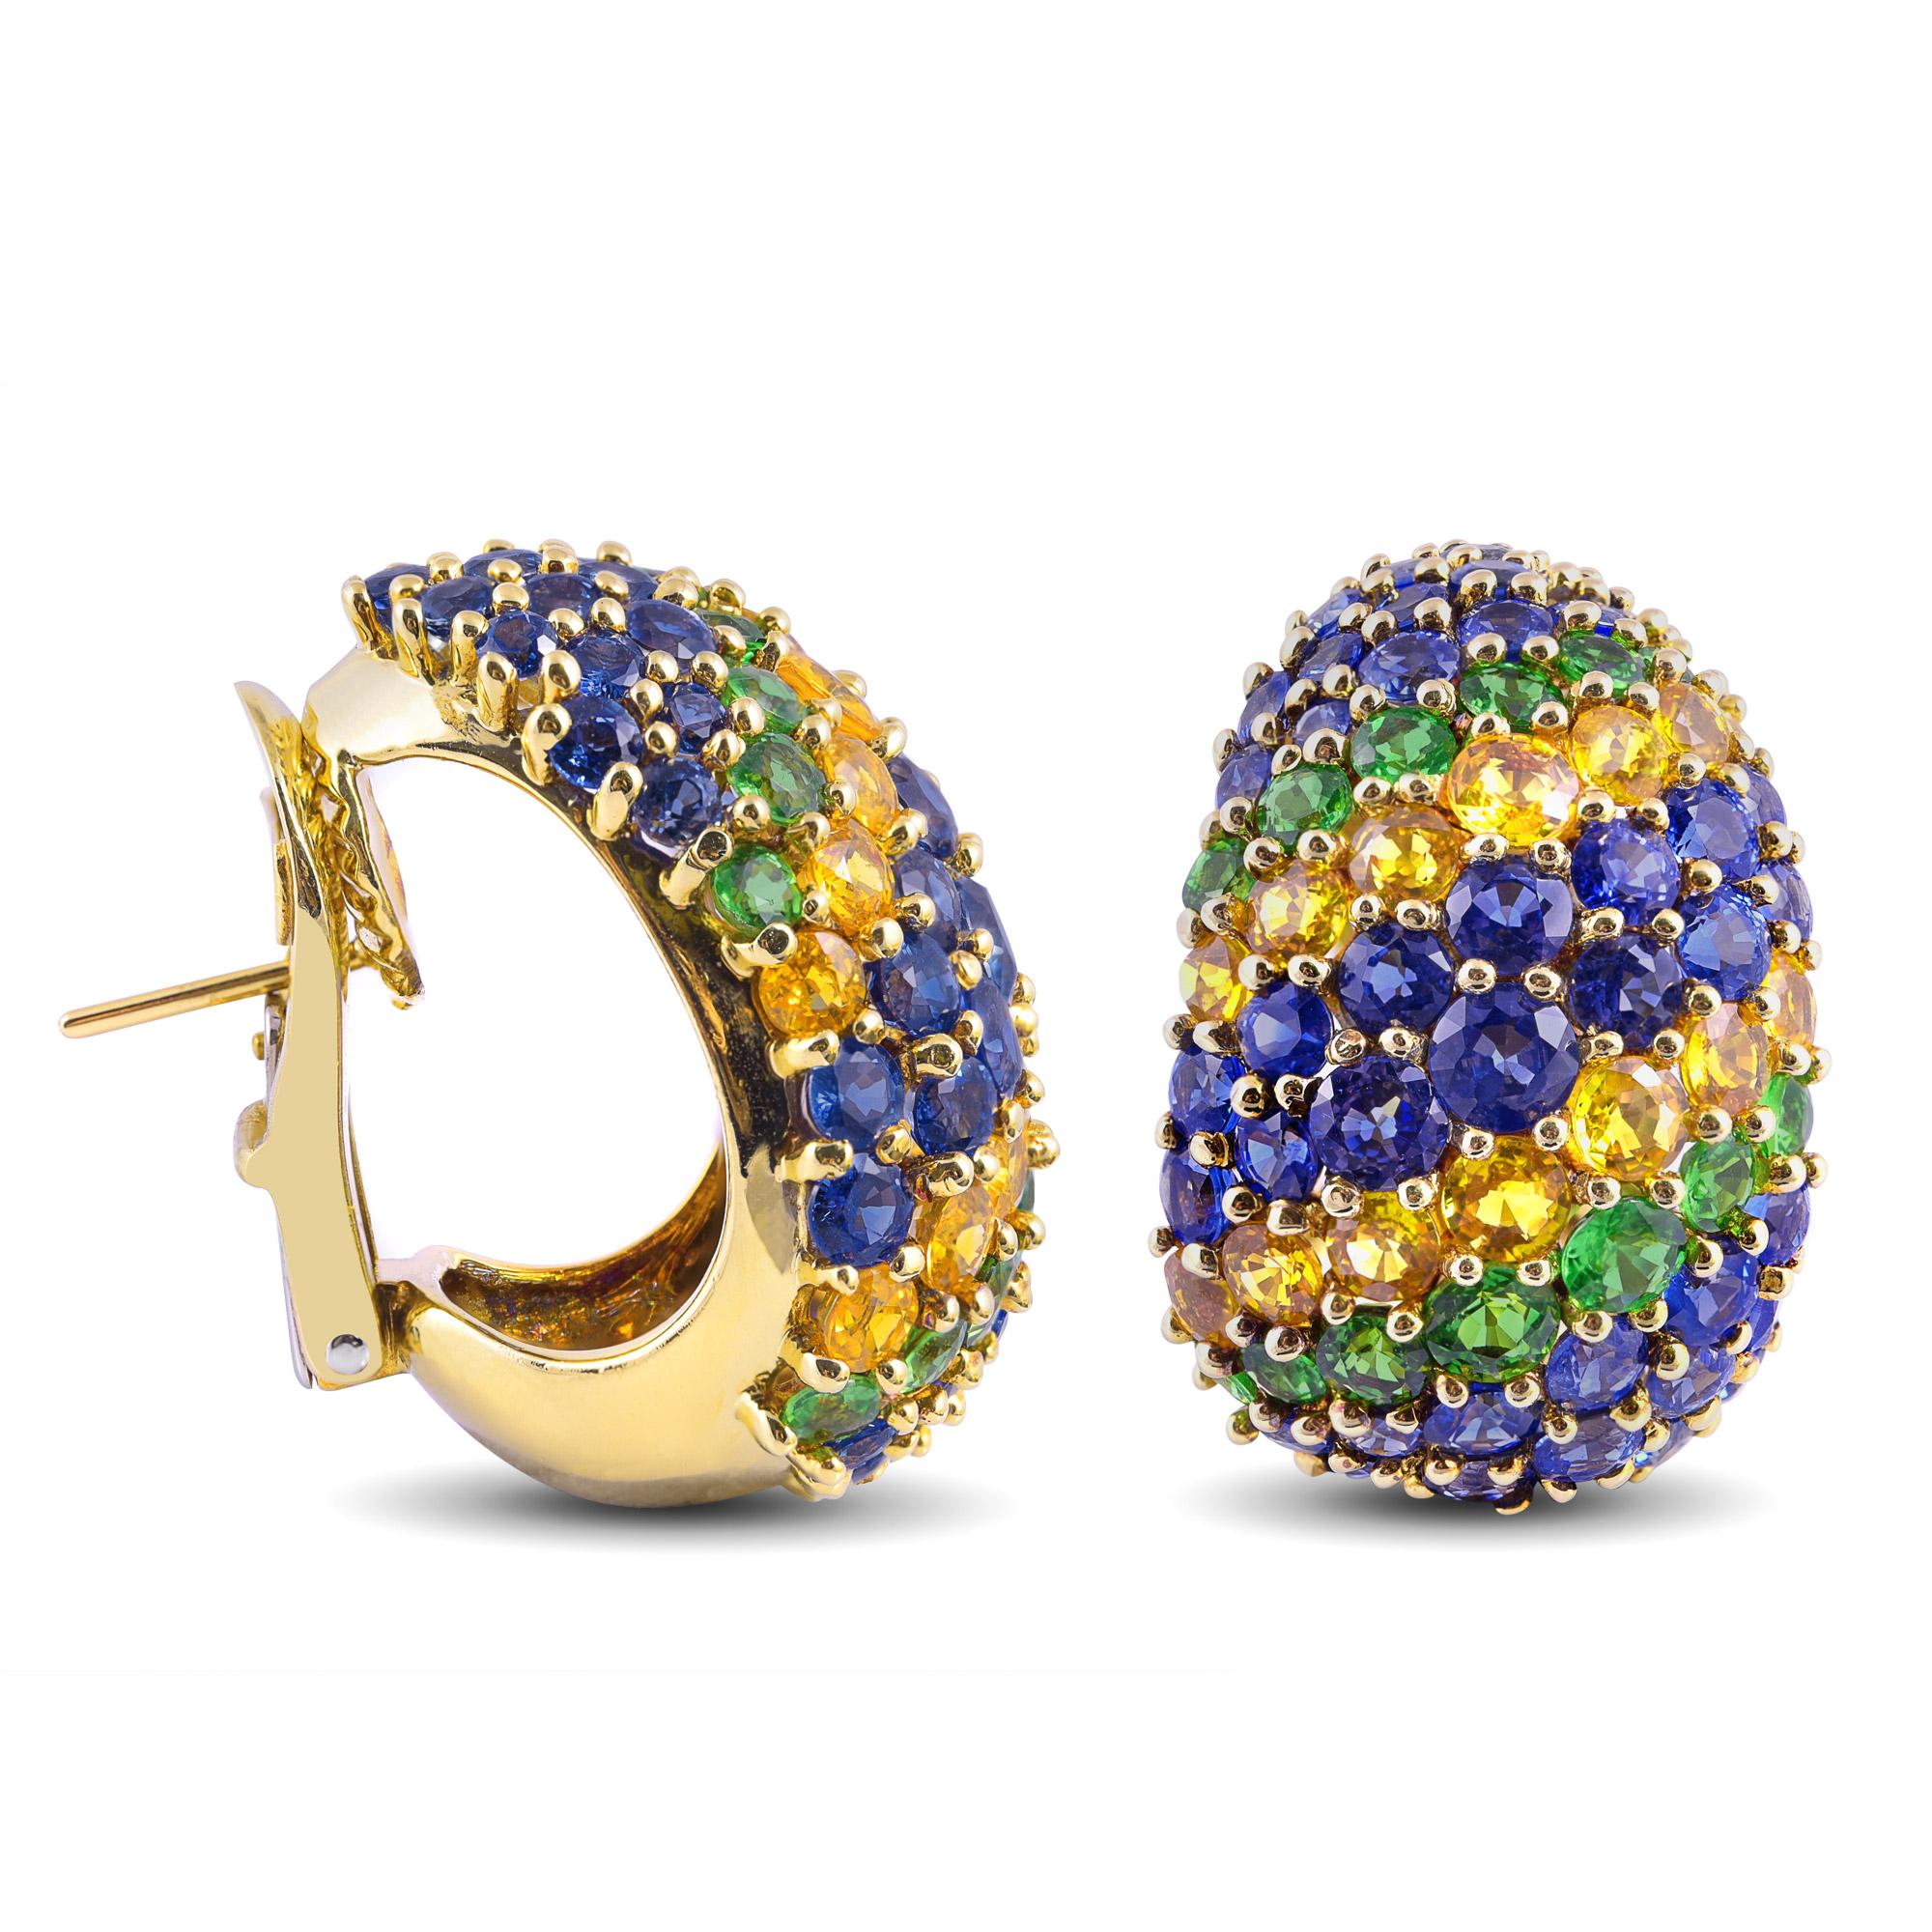 Immerse yourself in a vivid display of colors with these designer Jean Vitau earrings, meticulously crafted in gleaming 18K yellow gold. The imaginative design features round-cut blue and yellow sapphires, beautifully accompanied by lively